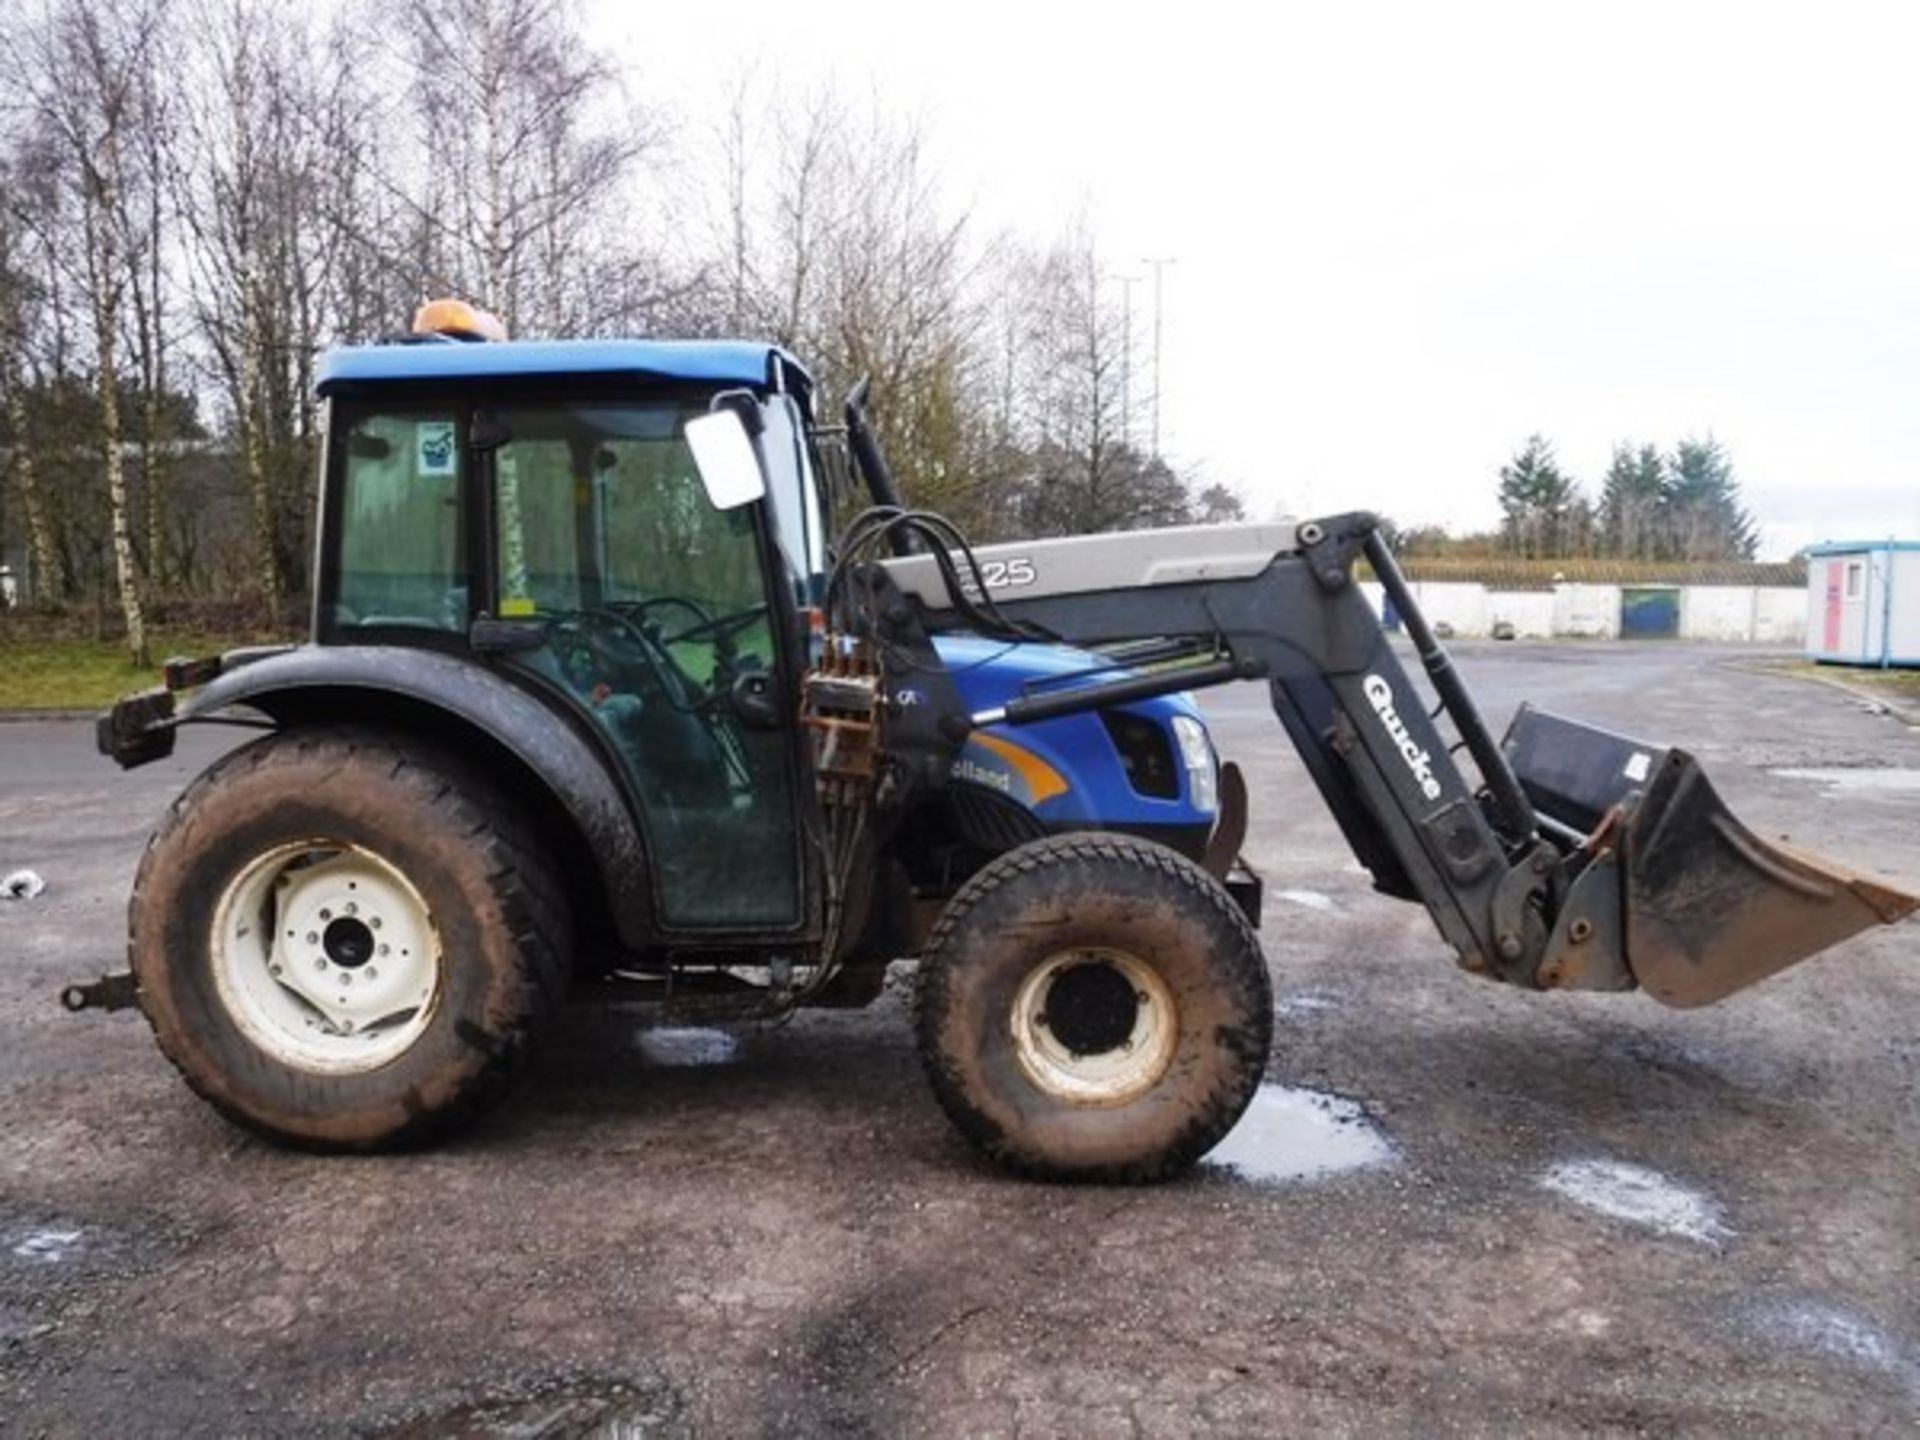 2008 NEW HOLLAND TN60 TRACTOR. REG NO SP08 DWY. SN 111054. GVW(TONNES) 4497, 3062HRS (NOT VERIFIED) - Image 38 of 40